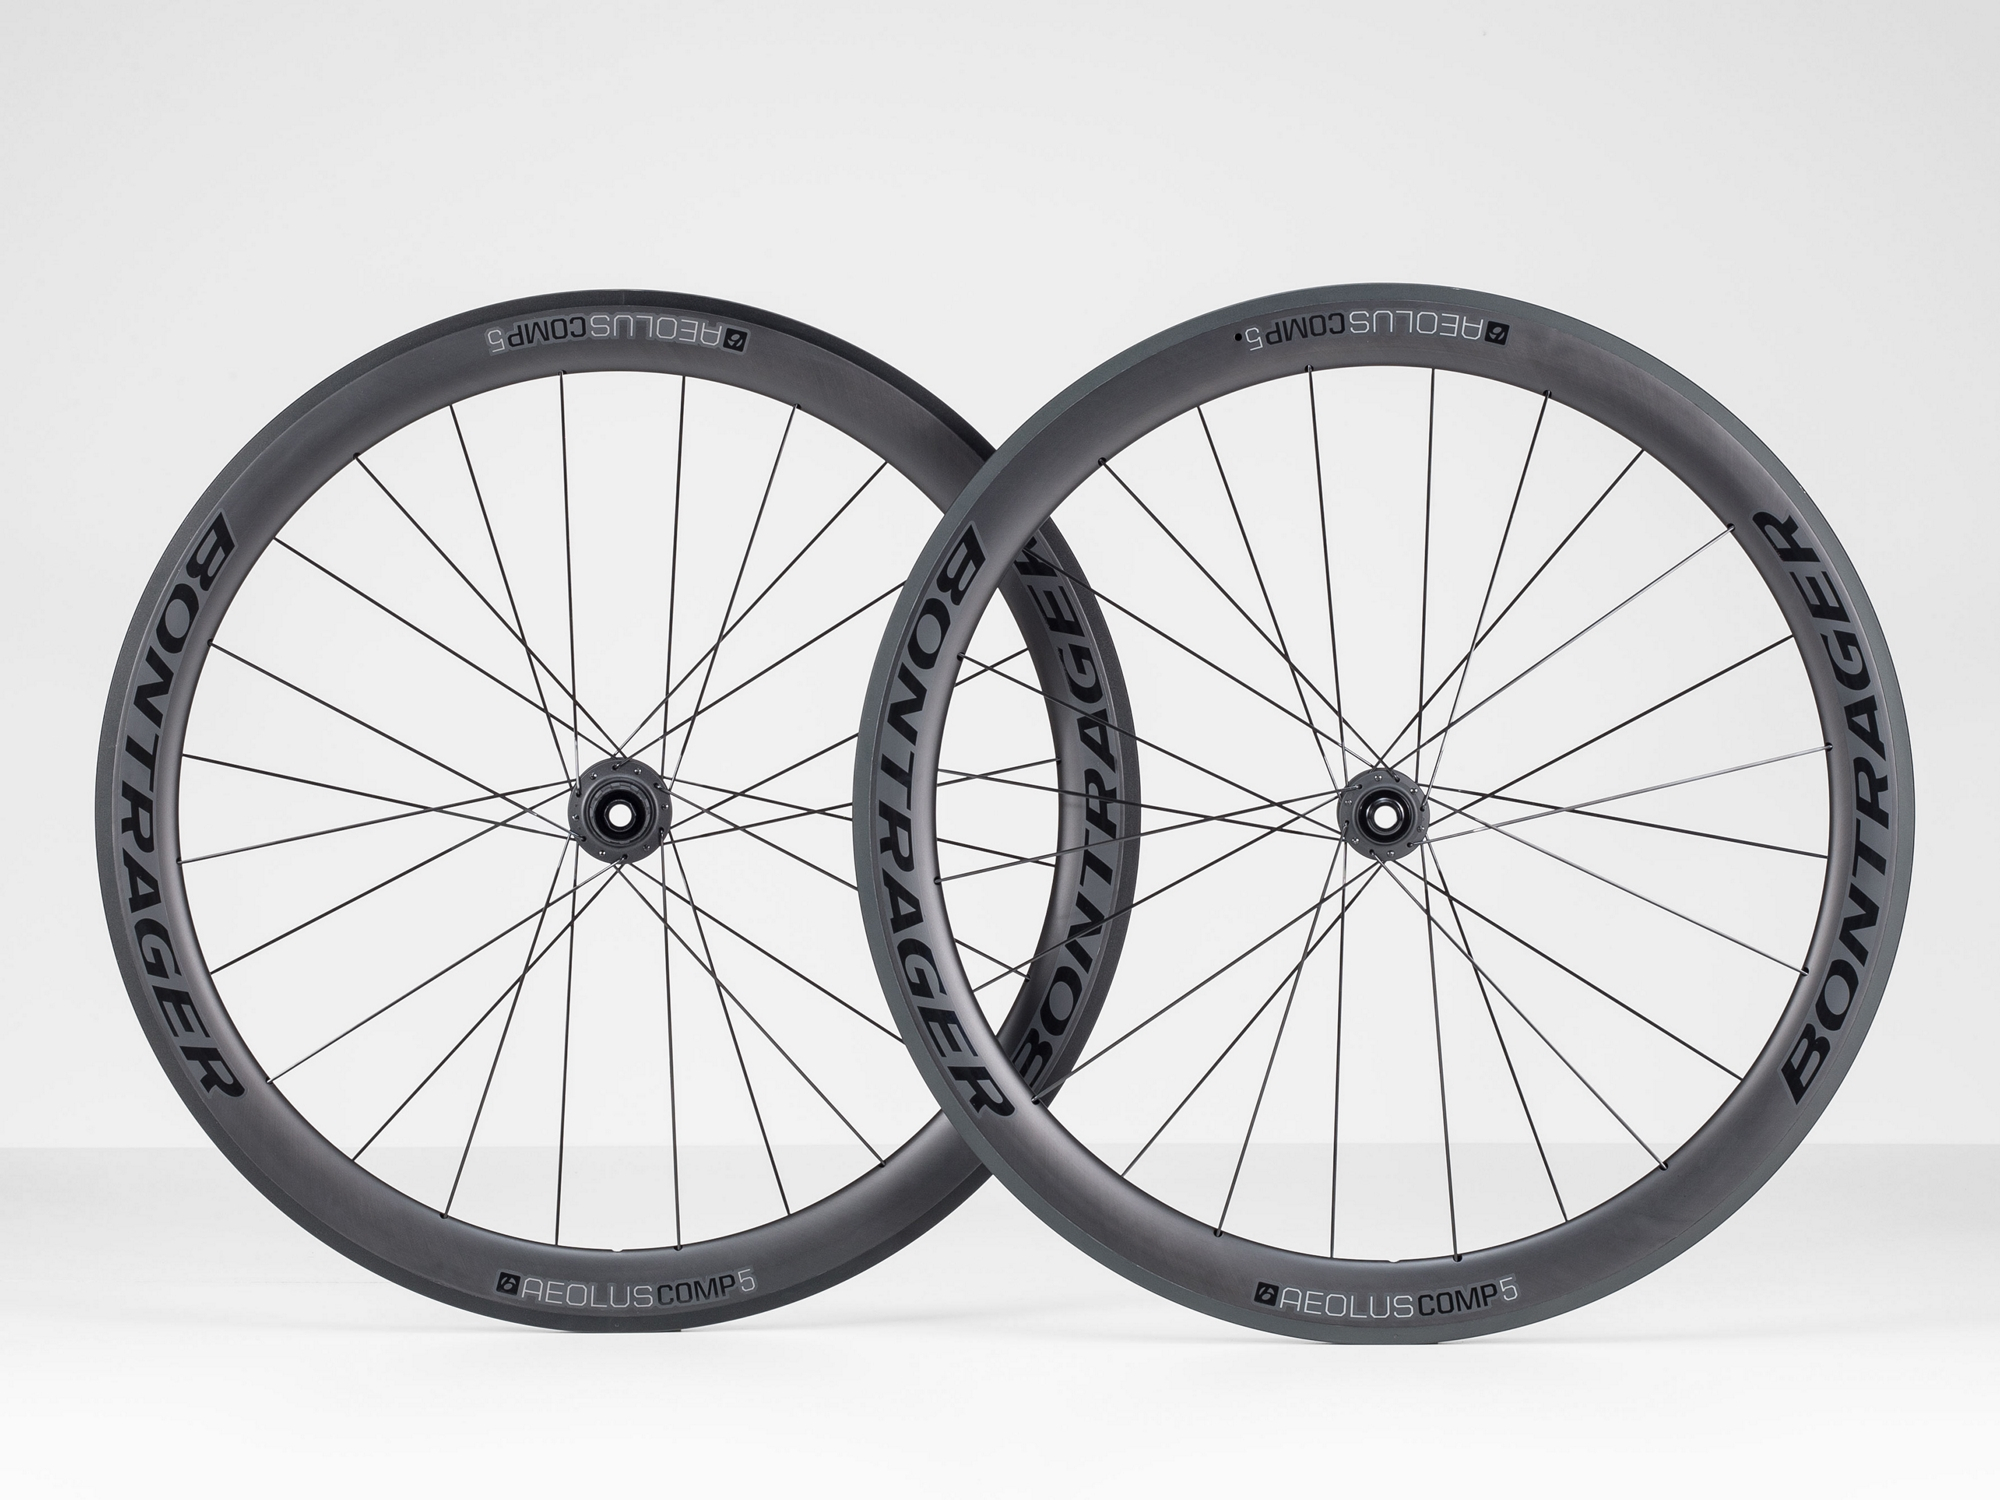 Bontrager Aeolus Comp 5 TLR Disc Road Wheel - Garys Cycles | Home 